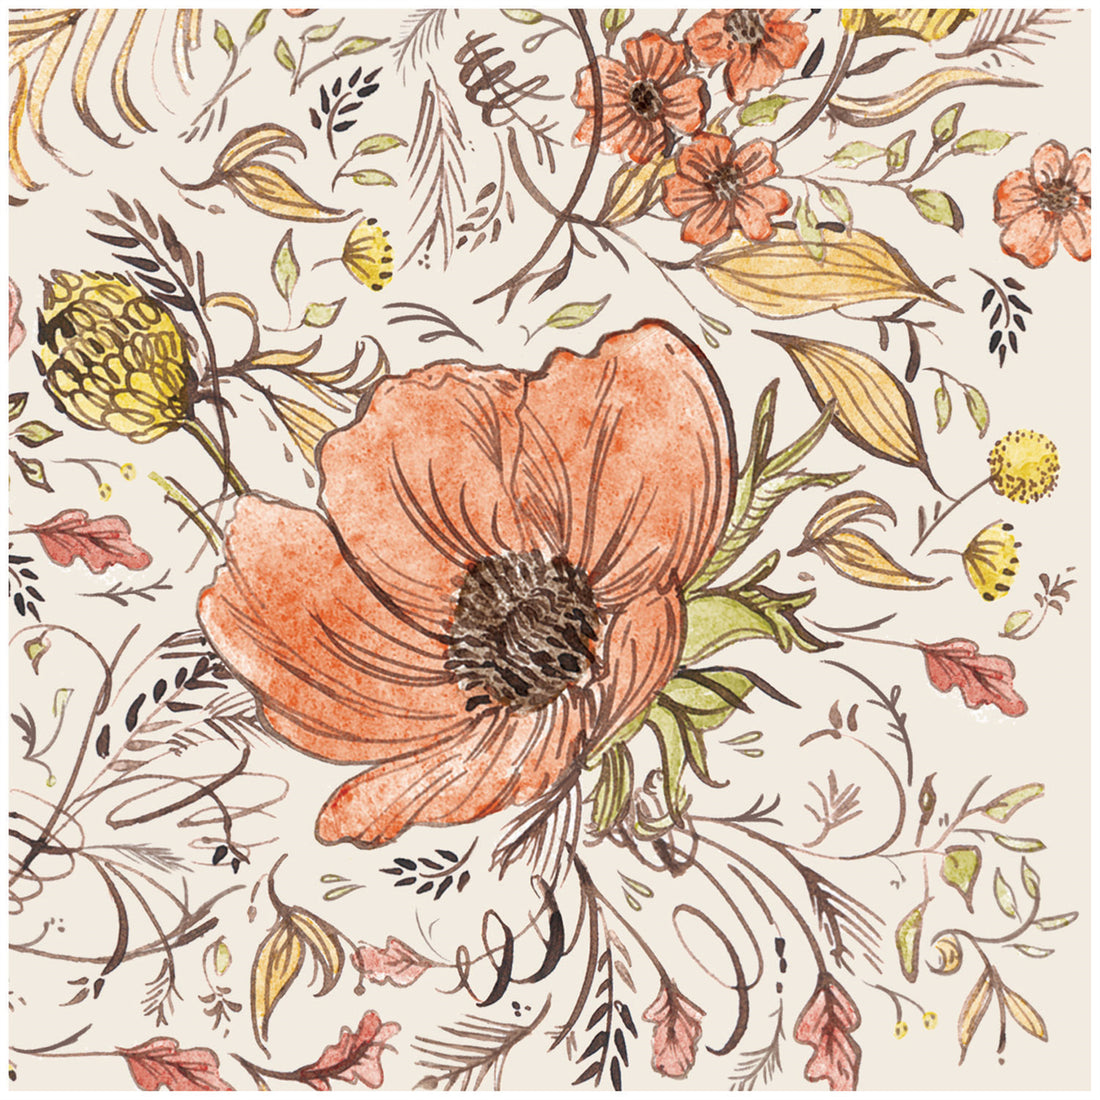 Edge-to-edge botanical design featuring large and small orange flowers, small orange and yellow leaves and seed pods, with painterly flourishes on a white background, on a square cocktail napkin.